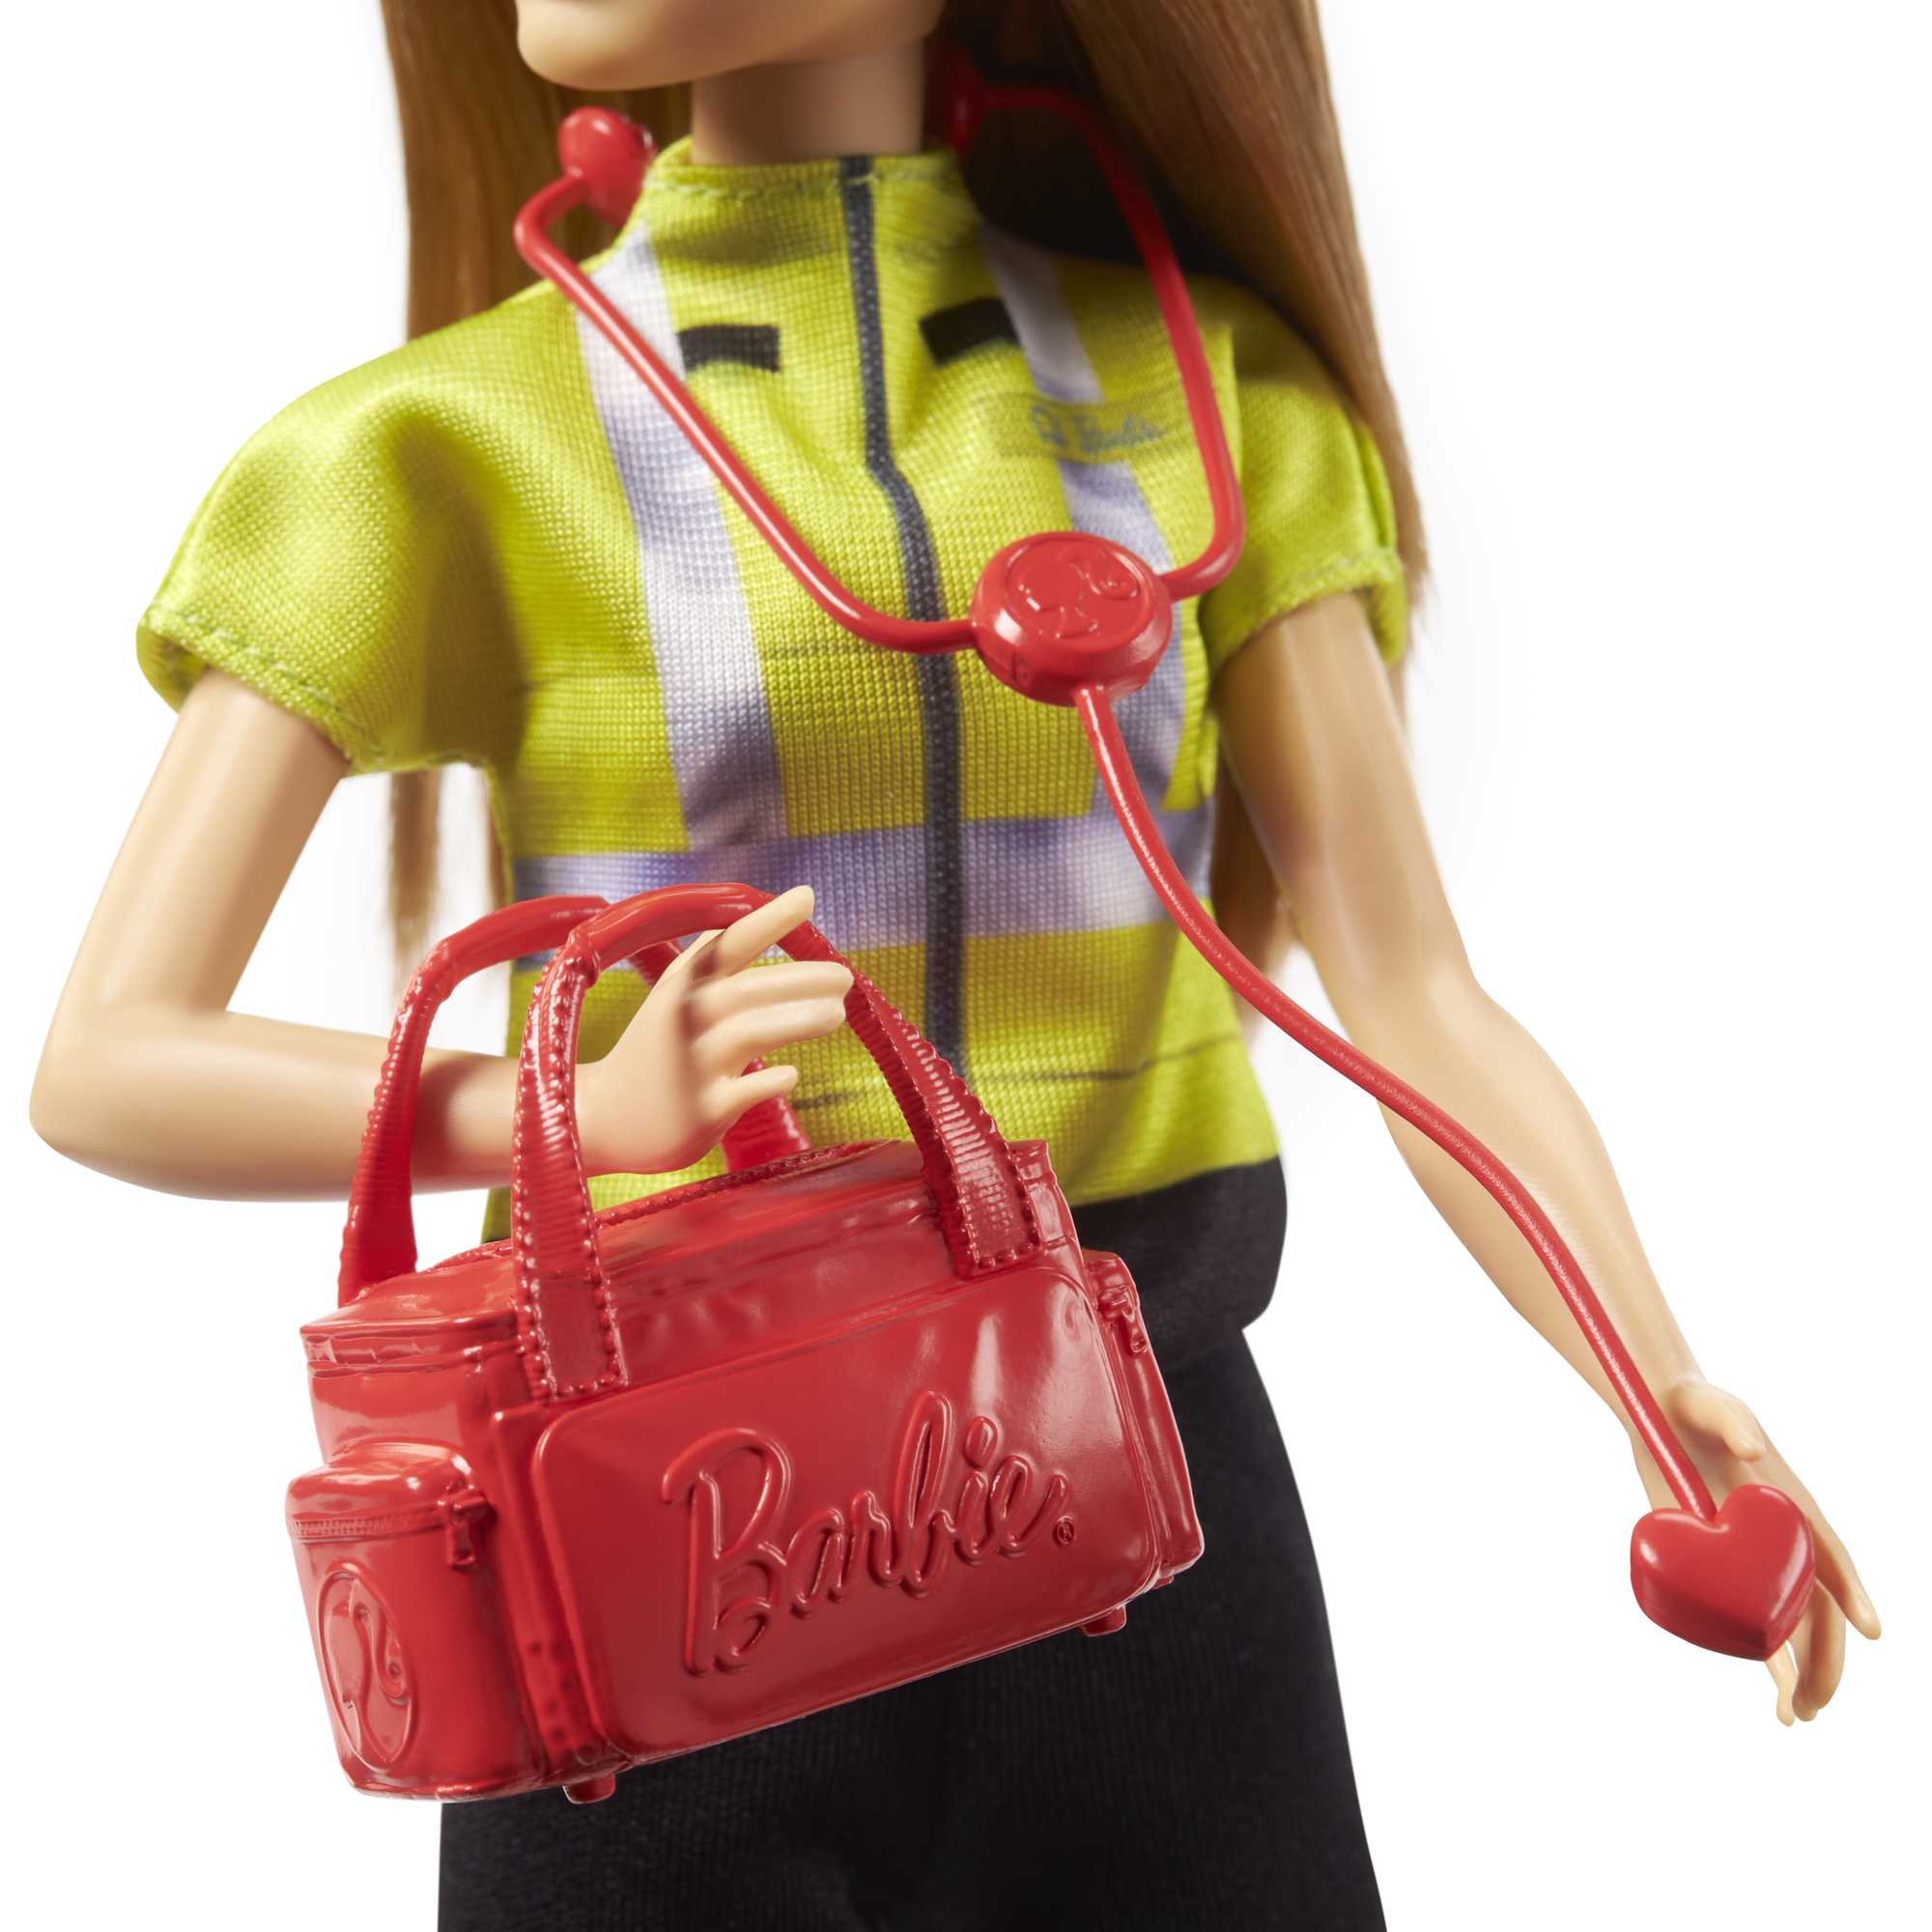 Barbie Paramedic Petite Fashion Doll with Brunette Hair, Stethoscope, Medical Bag & Accessories - image 3 of 6